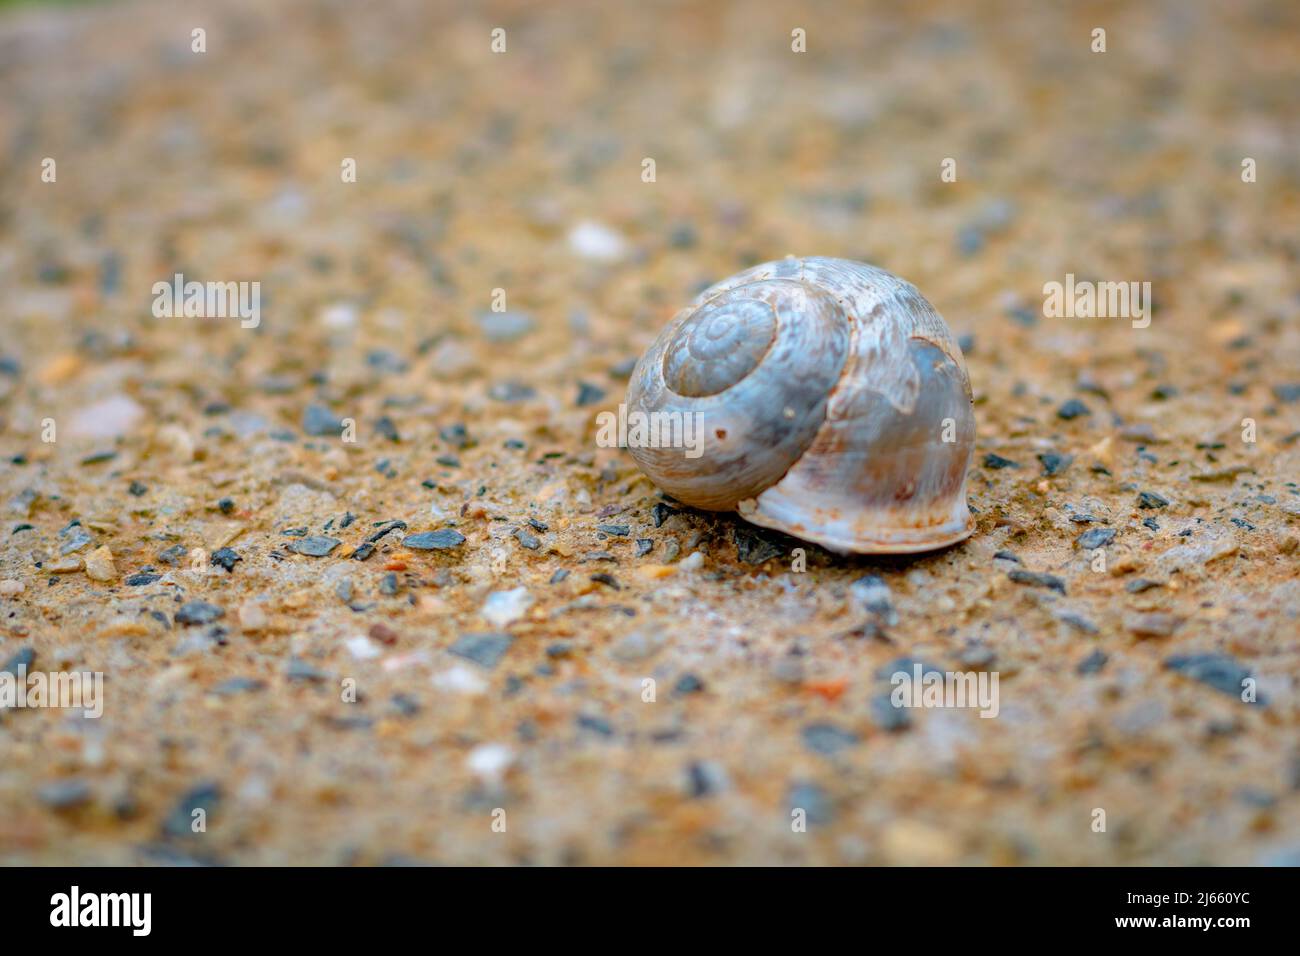 Leaving home concept photo. A snail shell without a snail in focus. Stock Photo